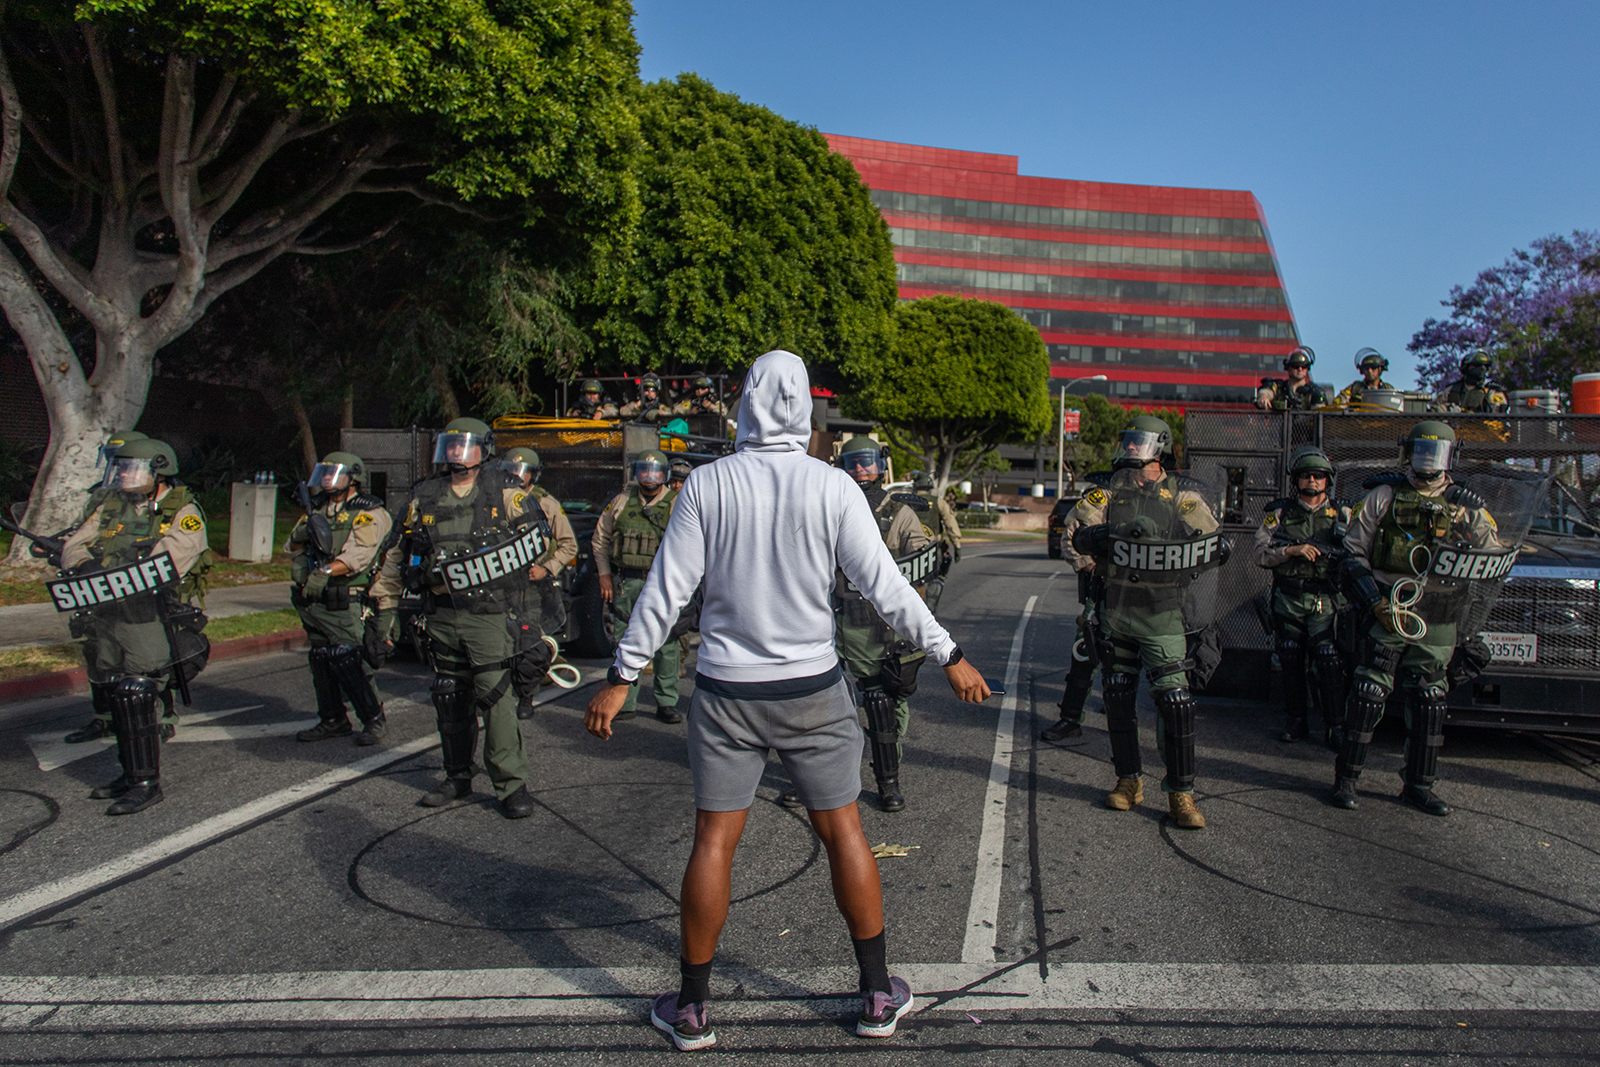 A protester stands in front of West Hollywood Police Police during a peaceful protest against police brutality and racism, in West Hollywood, California on June 6.